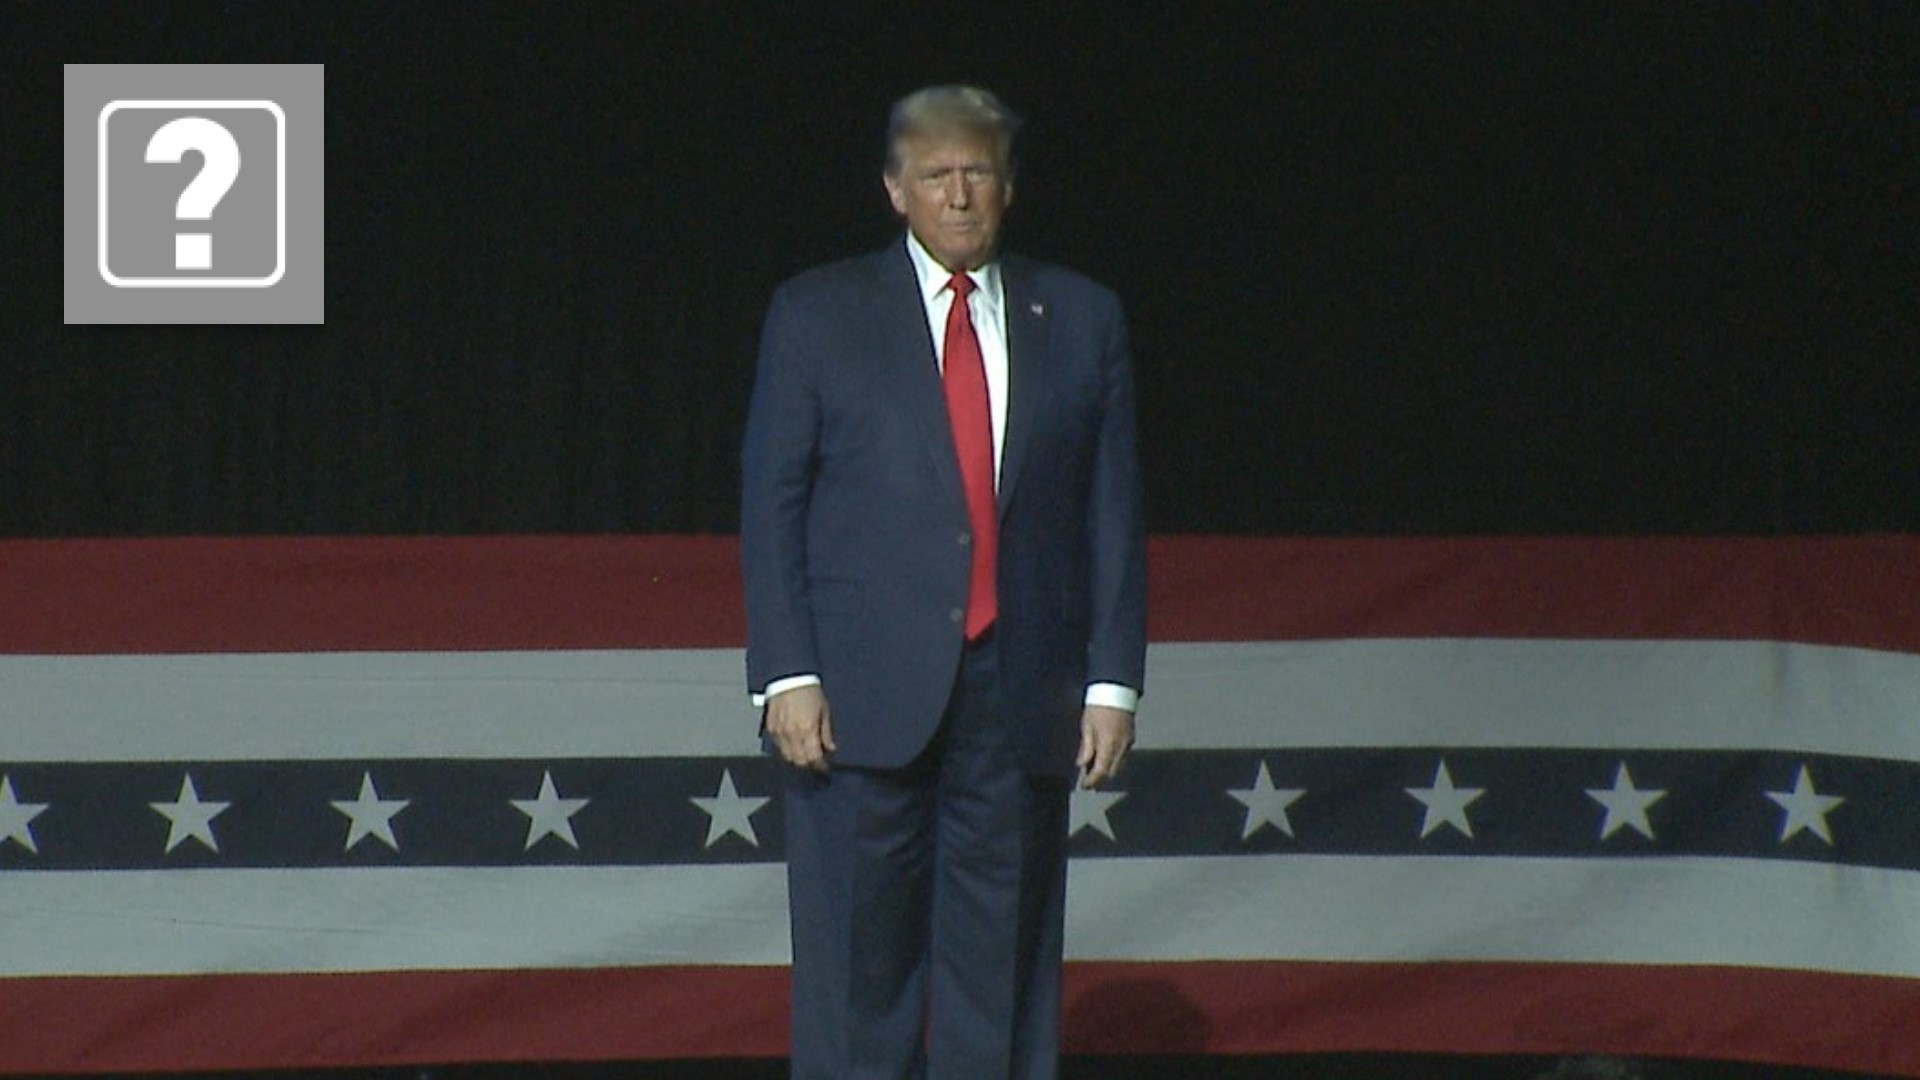 Former President Donald Trump took the stage in Harrisburg in front of an estimated 7,000 people, addressing the crowd and some of the legal challenges he’s facing.